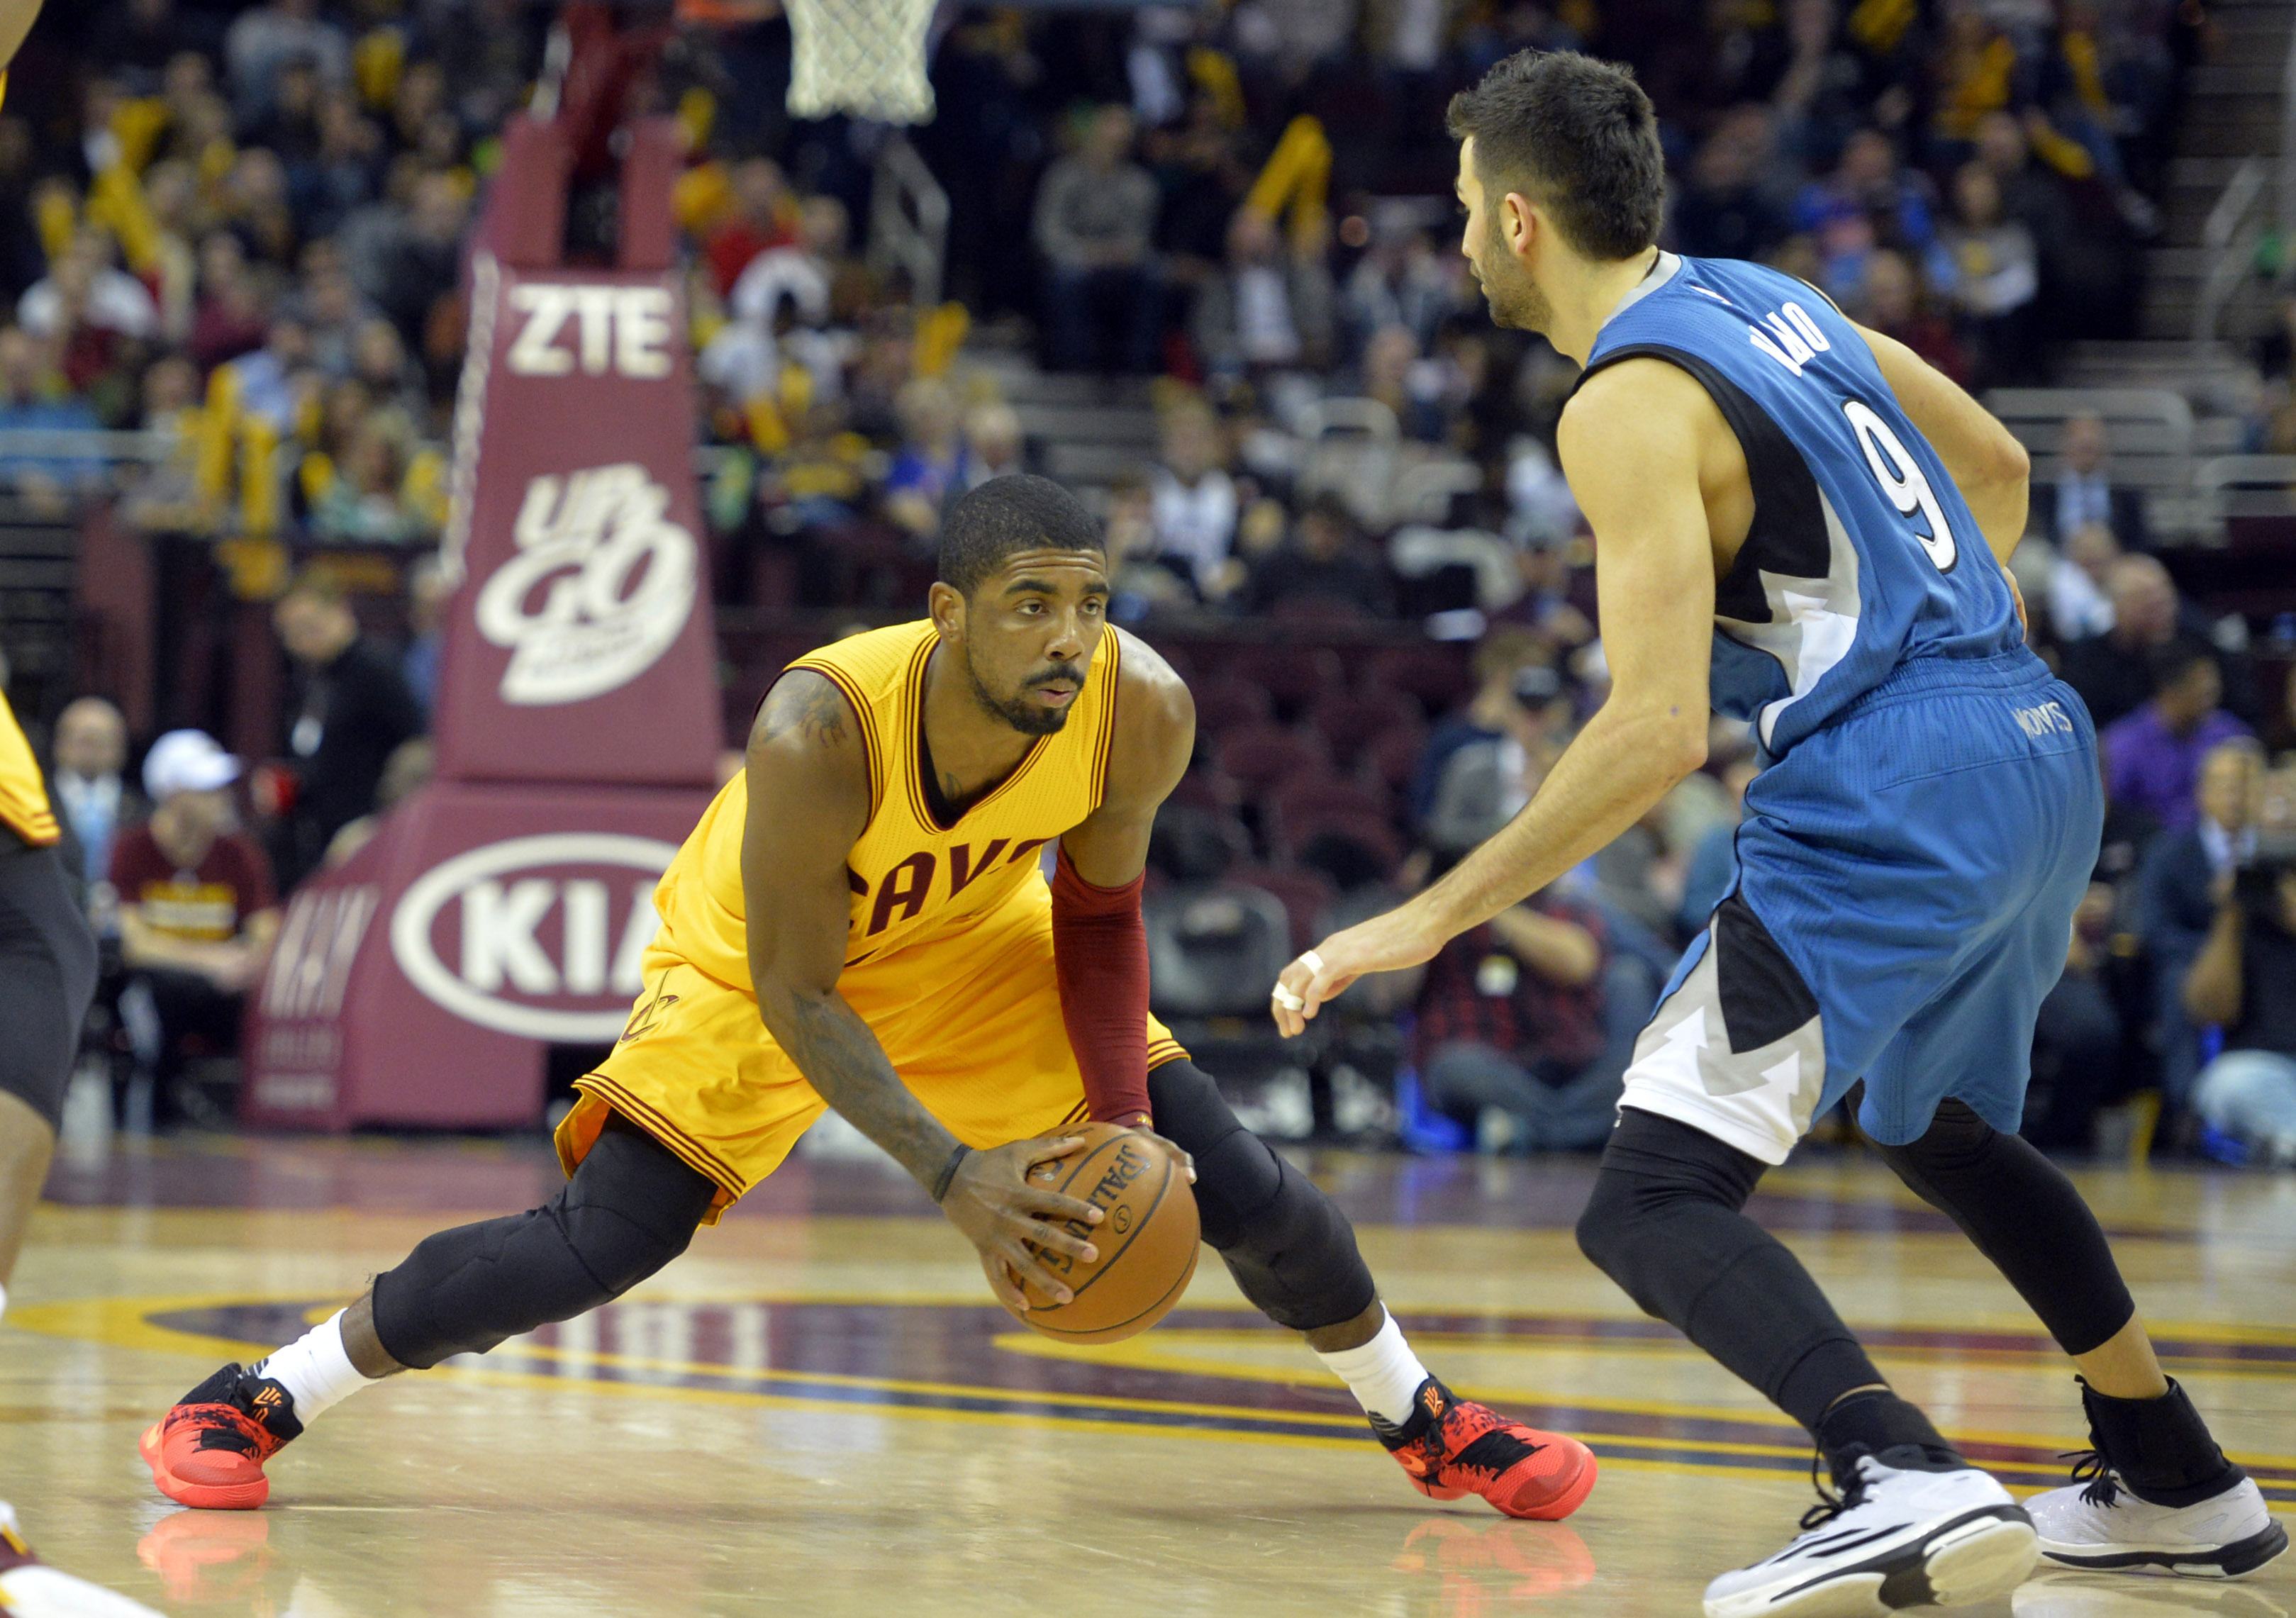 Timberwolves at Cavaliers live stream: How to watch online